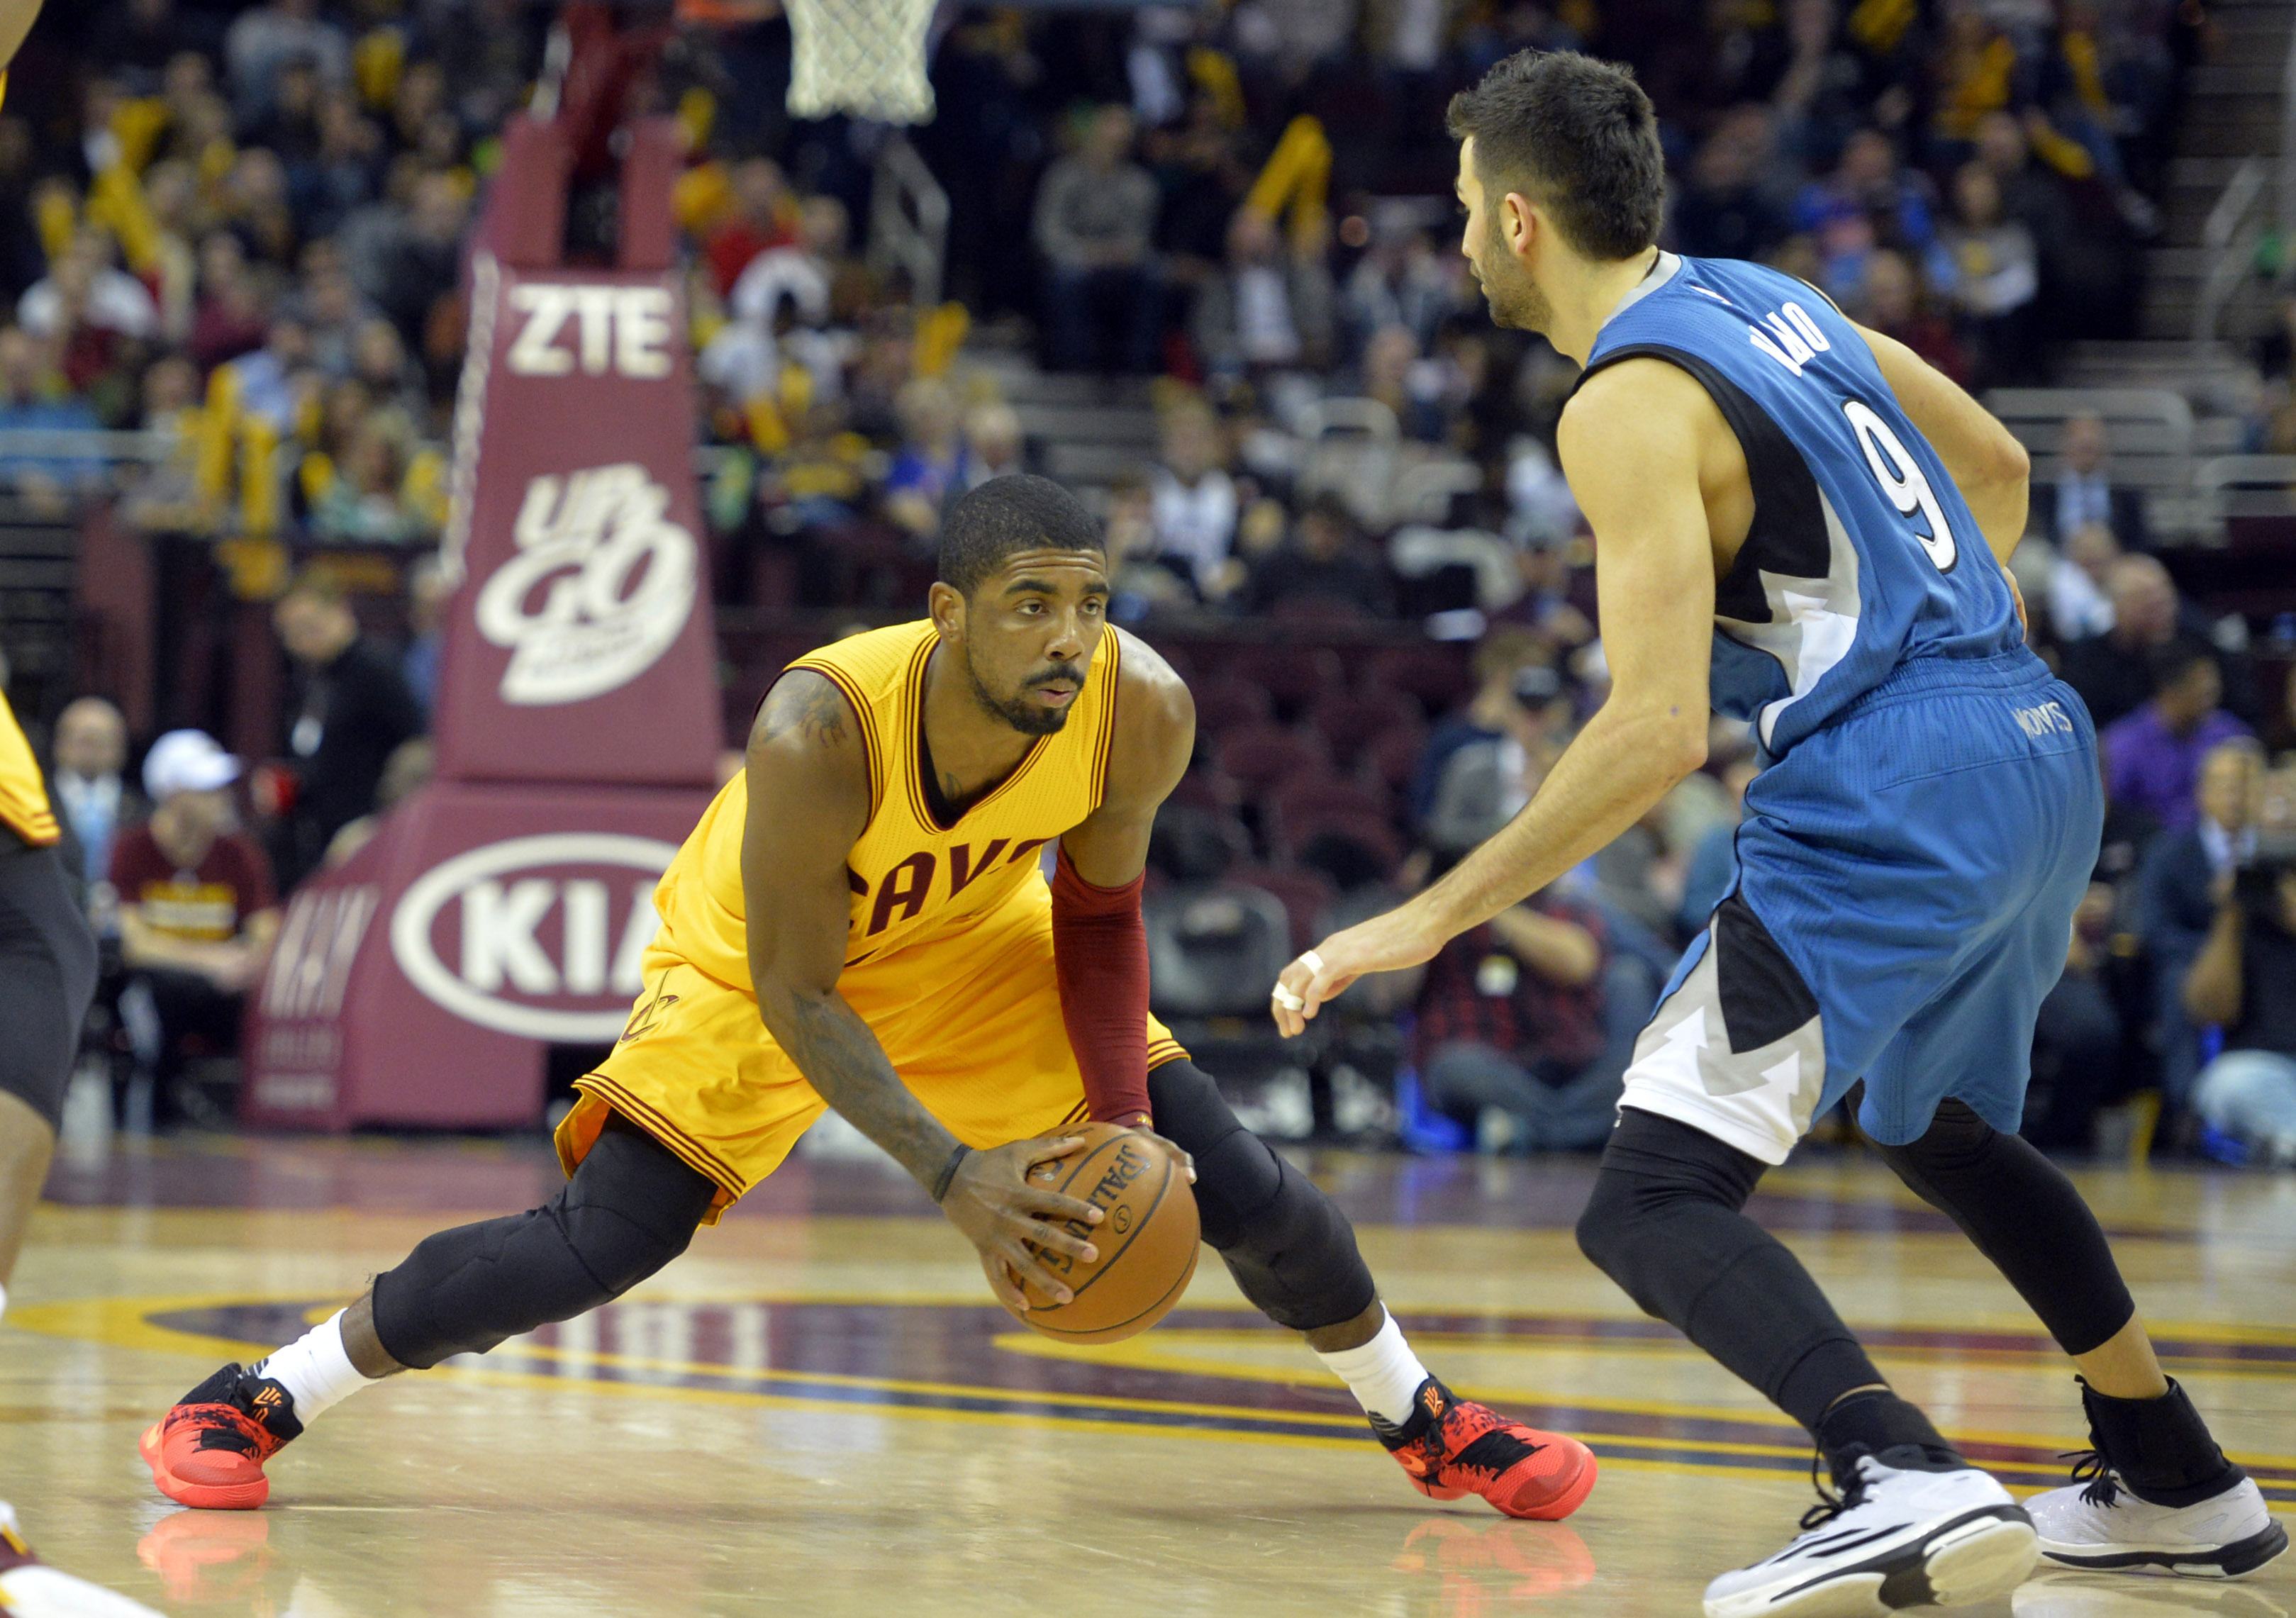 Timberwolves at Cavaliers live stream: How to watch online